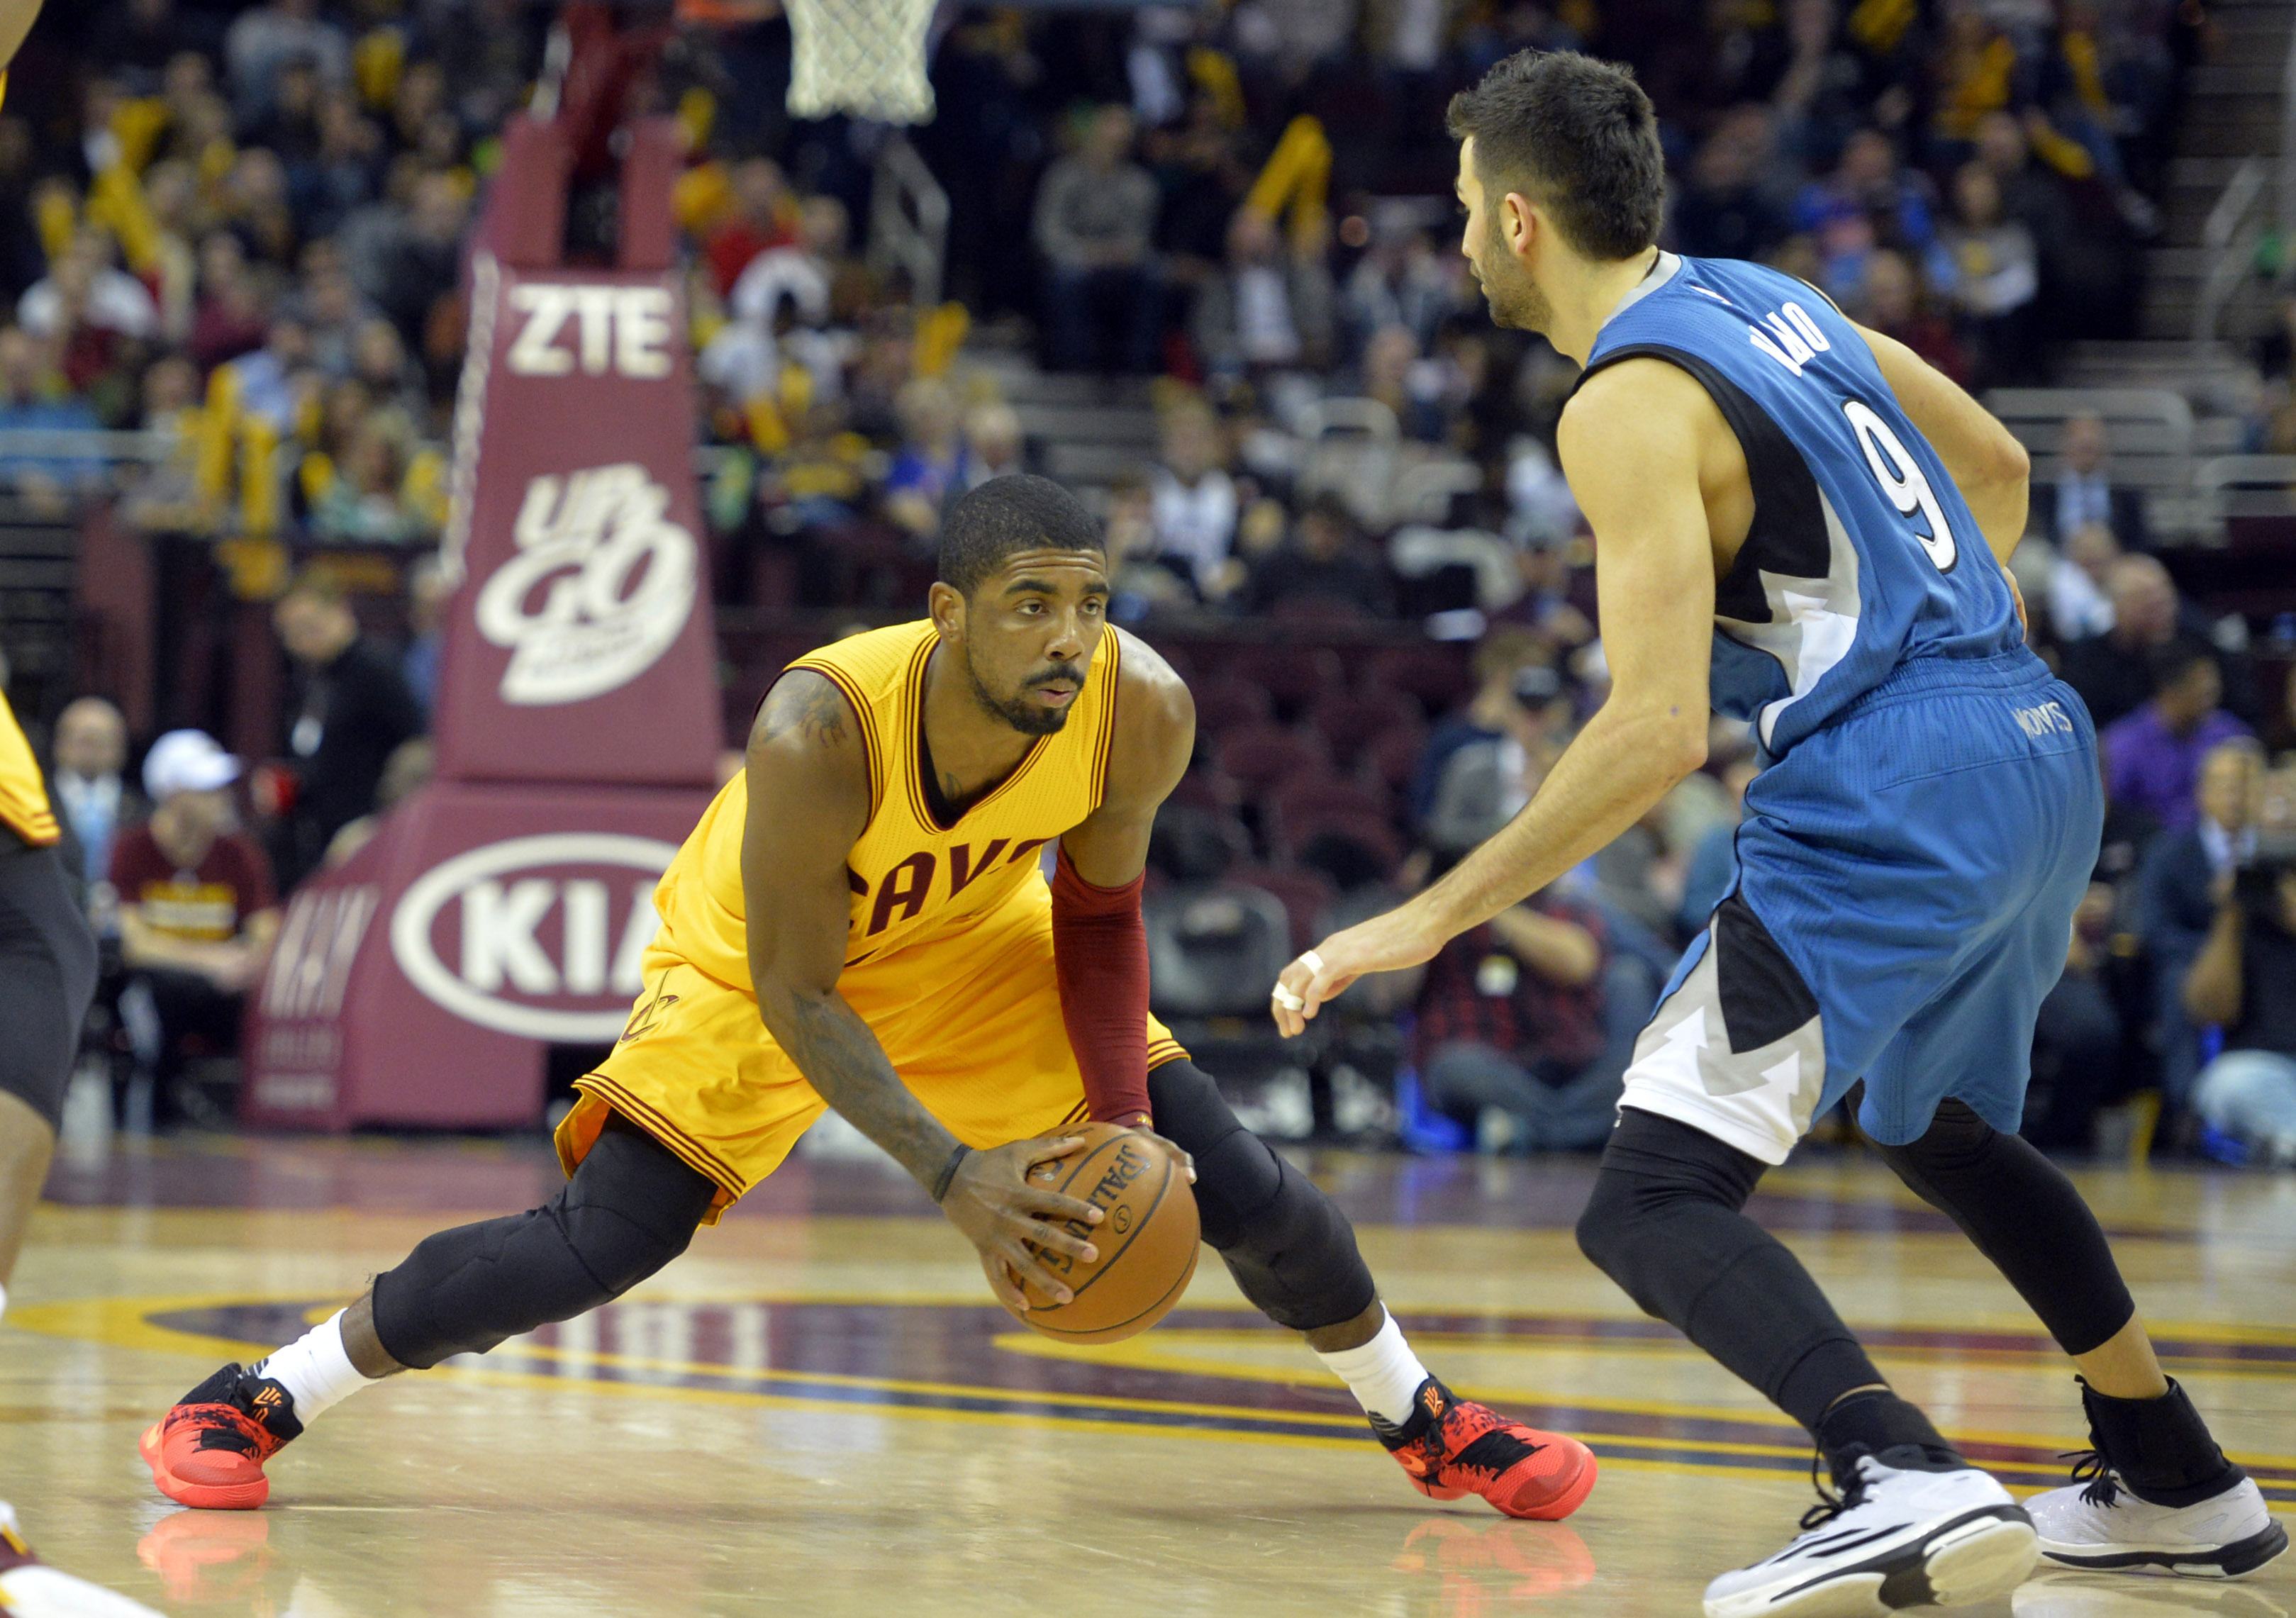 Timberwolves at Cavaliers live stream: How to watch online